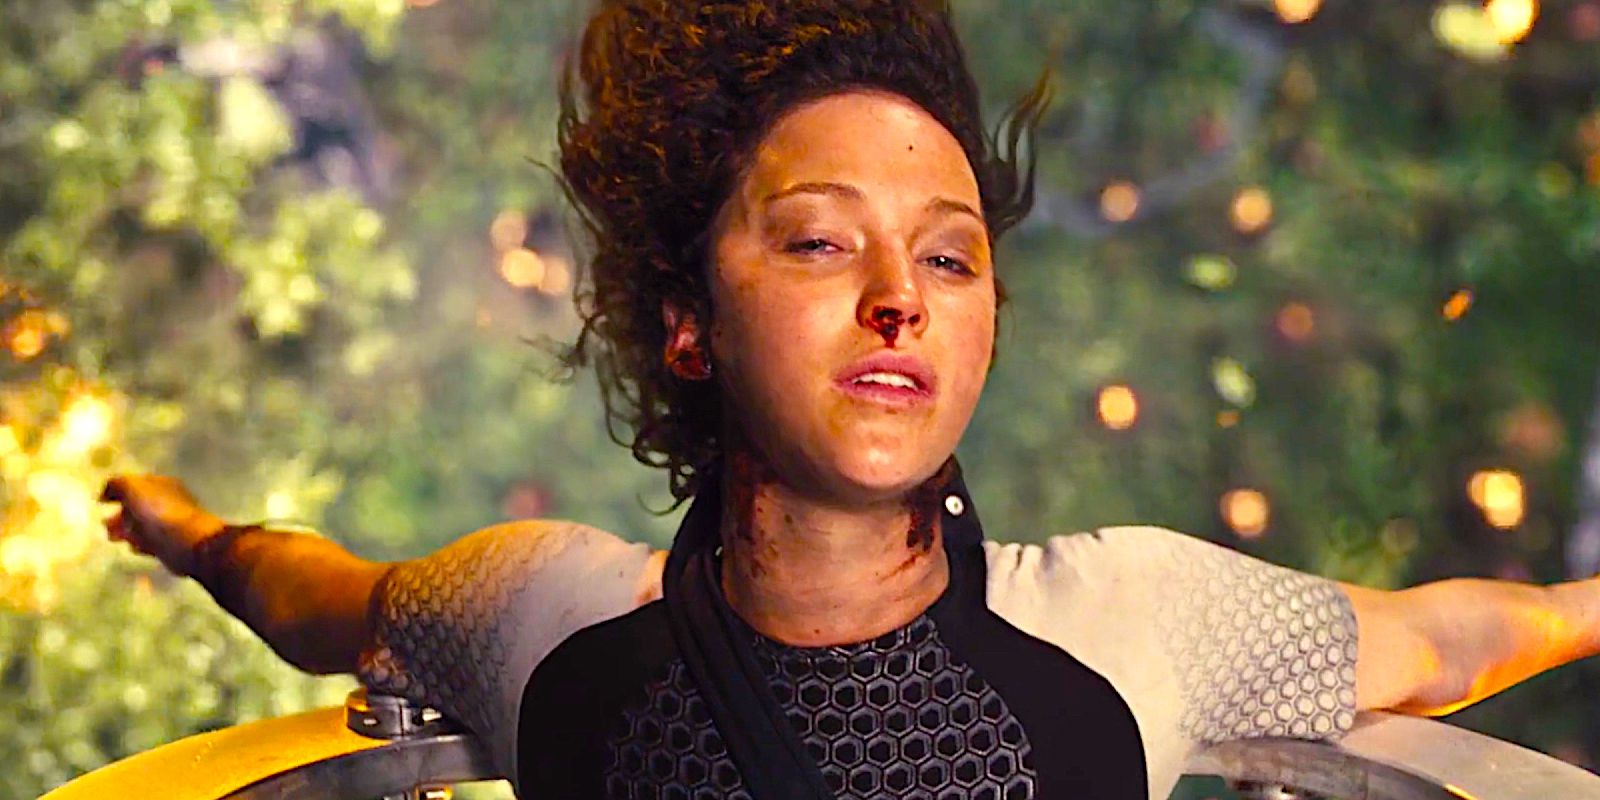 Katniss bloodied and bruised getting picked up by a massive claw in The Hunger Games Catching Fire